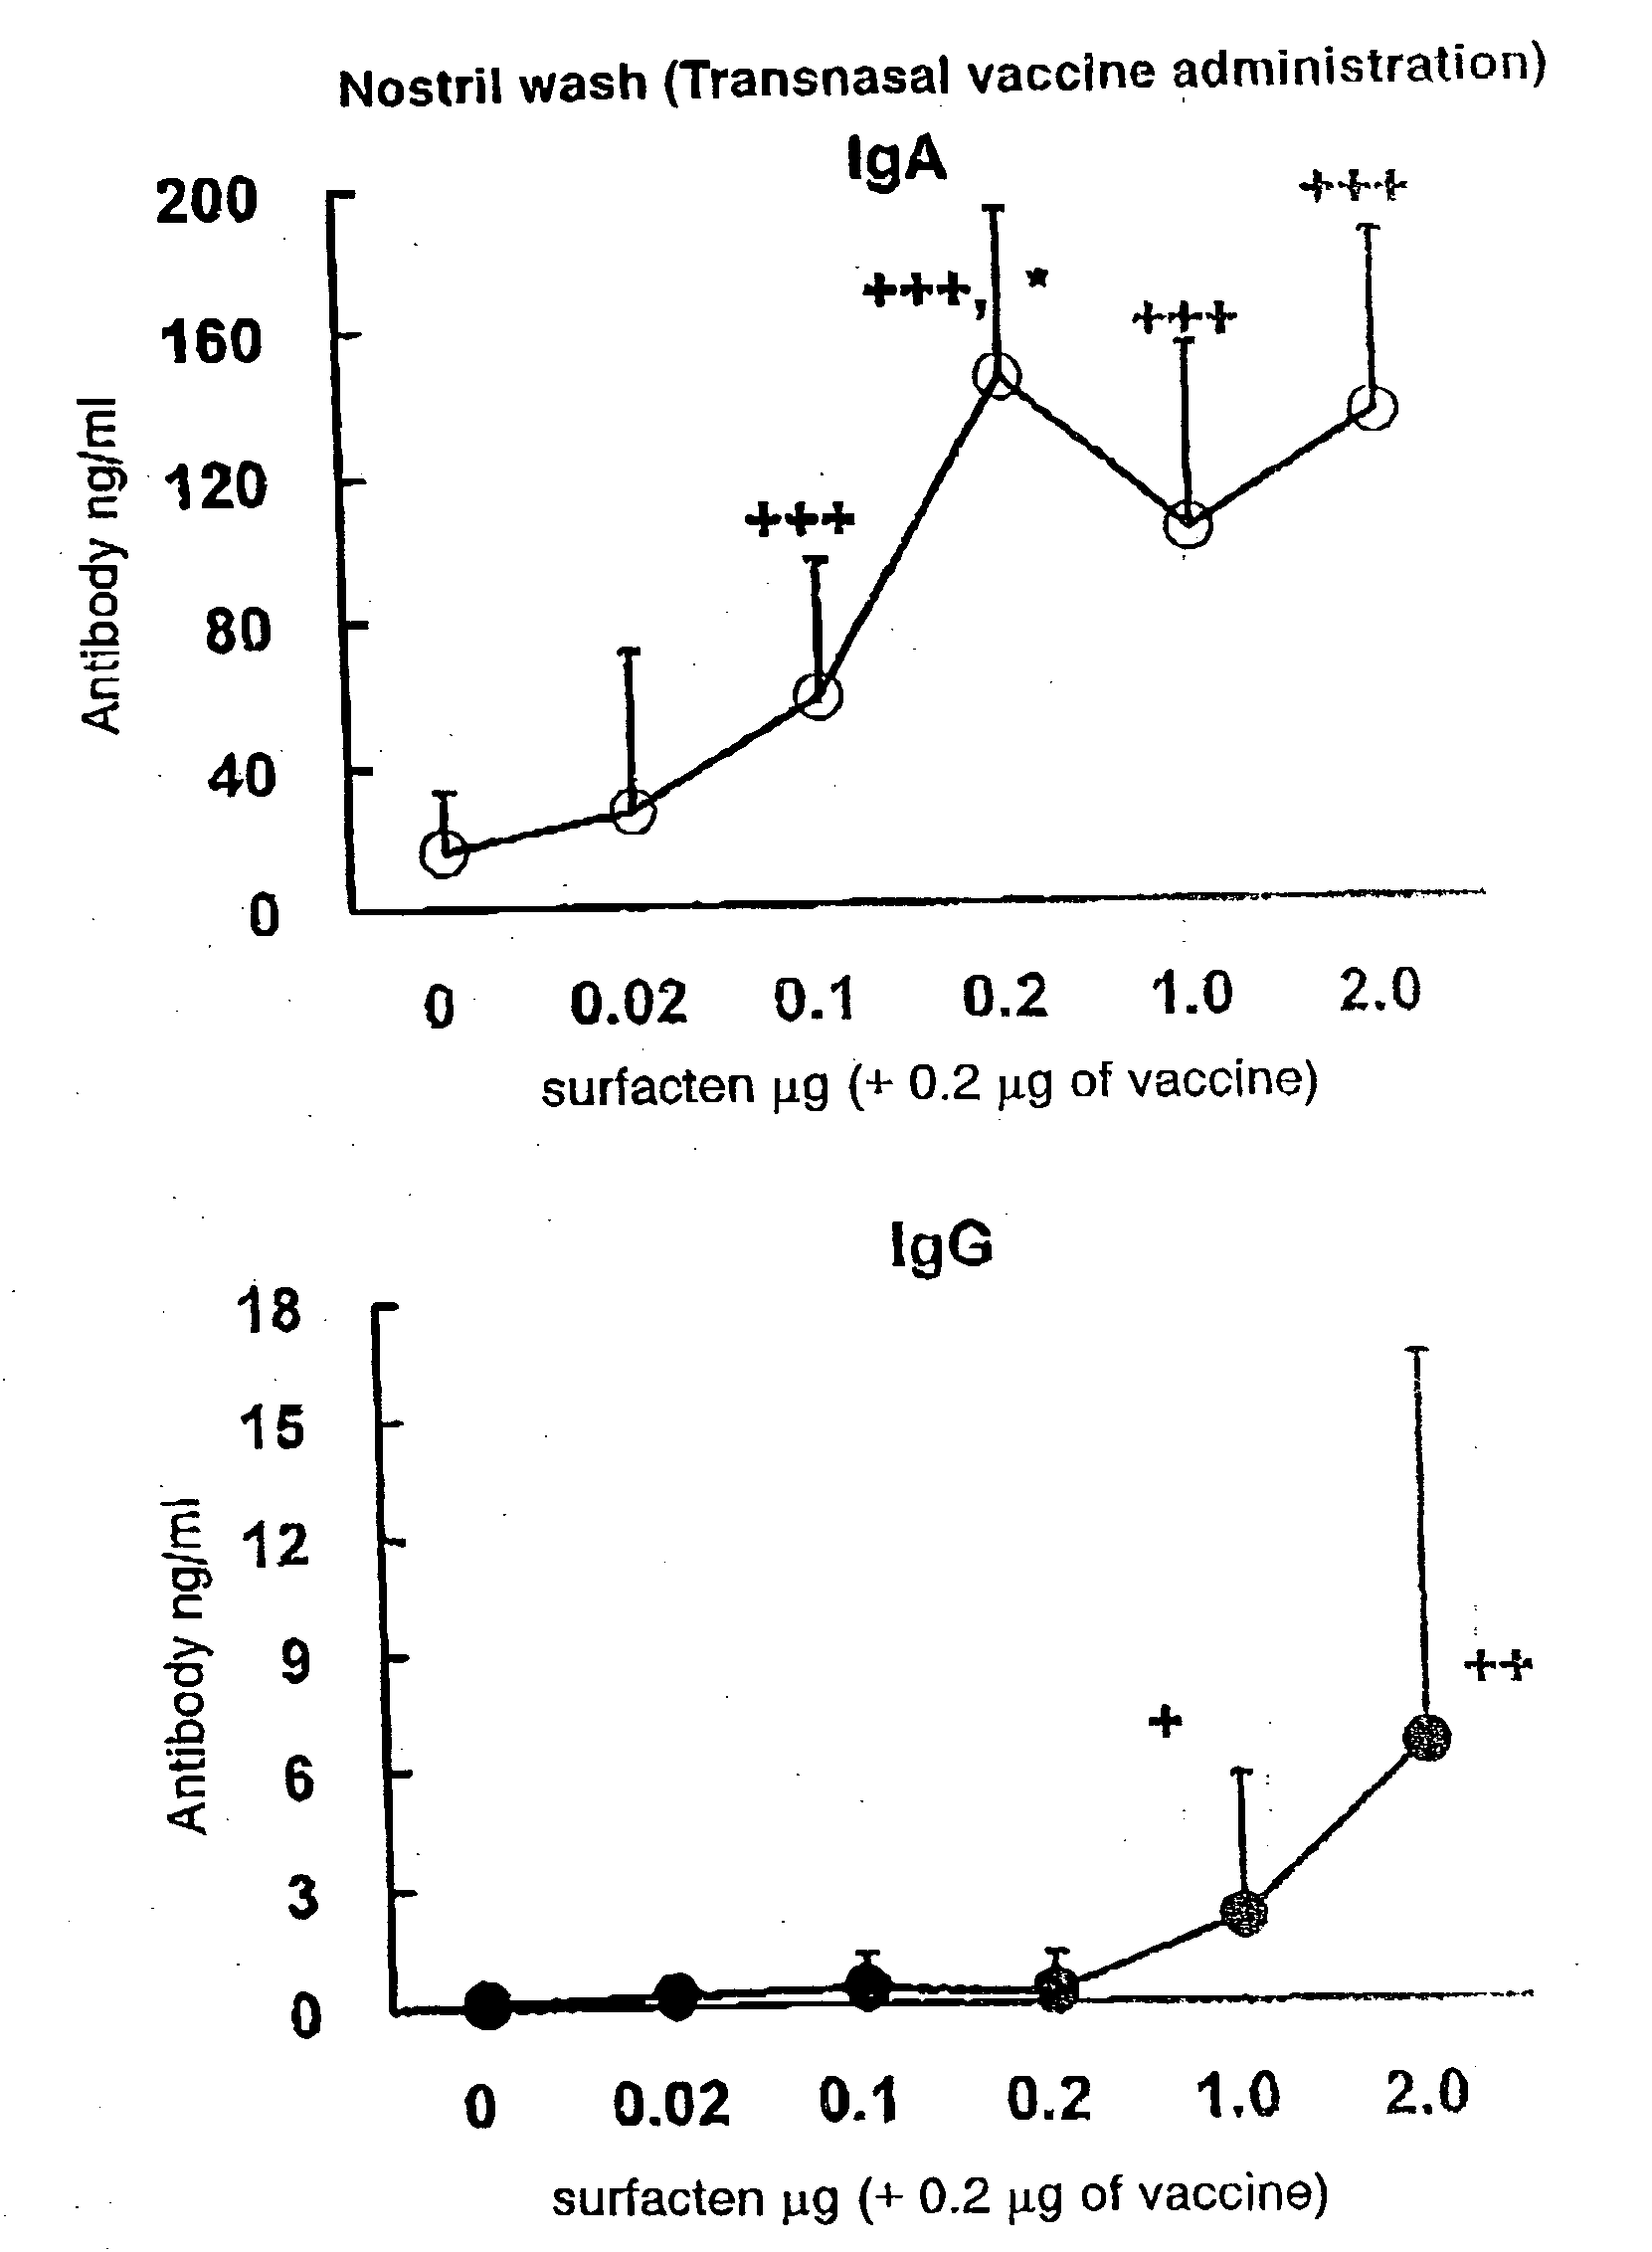 Antigen-Drug Vehicle Enabling Switch From Selective Production of IgA Antibody to Production of Both of IgA and IgG Antibodies and Transnasal/Mucosal Vaccine Using the Same